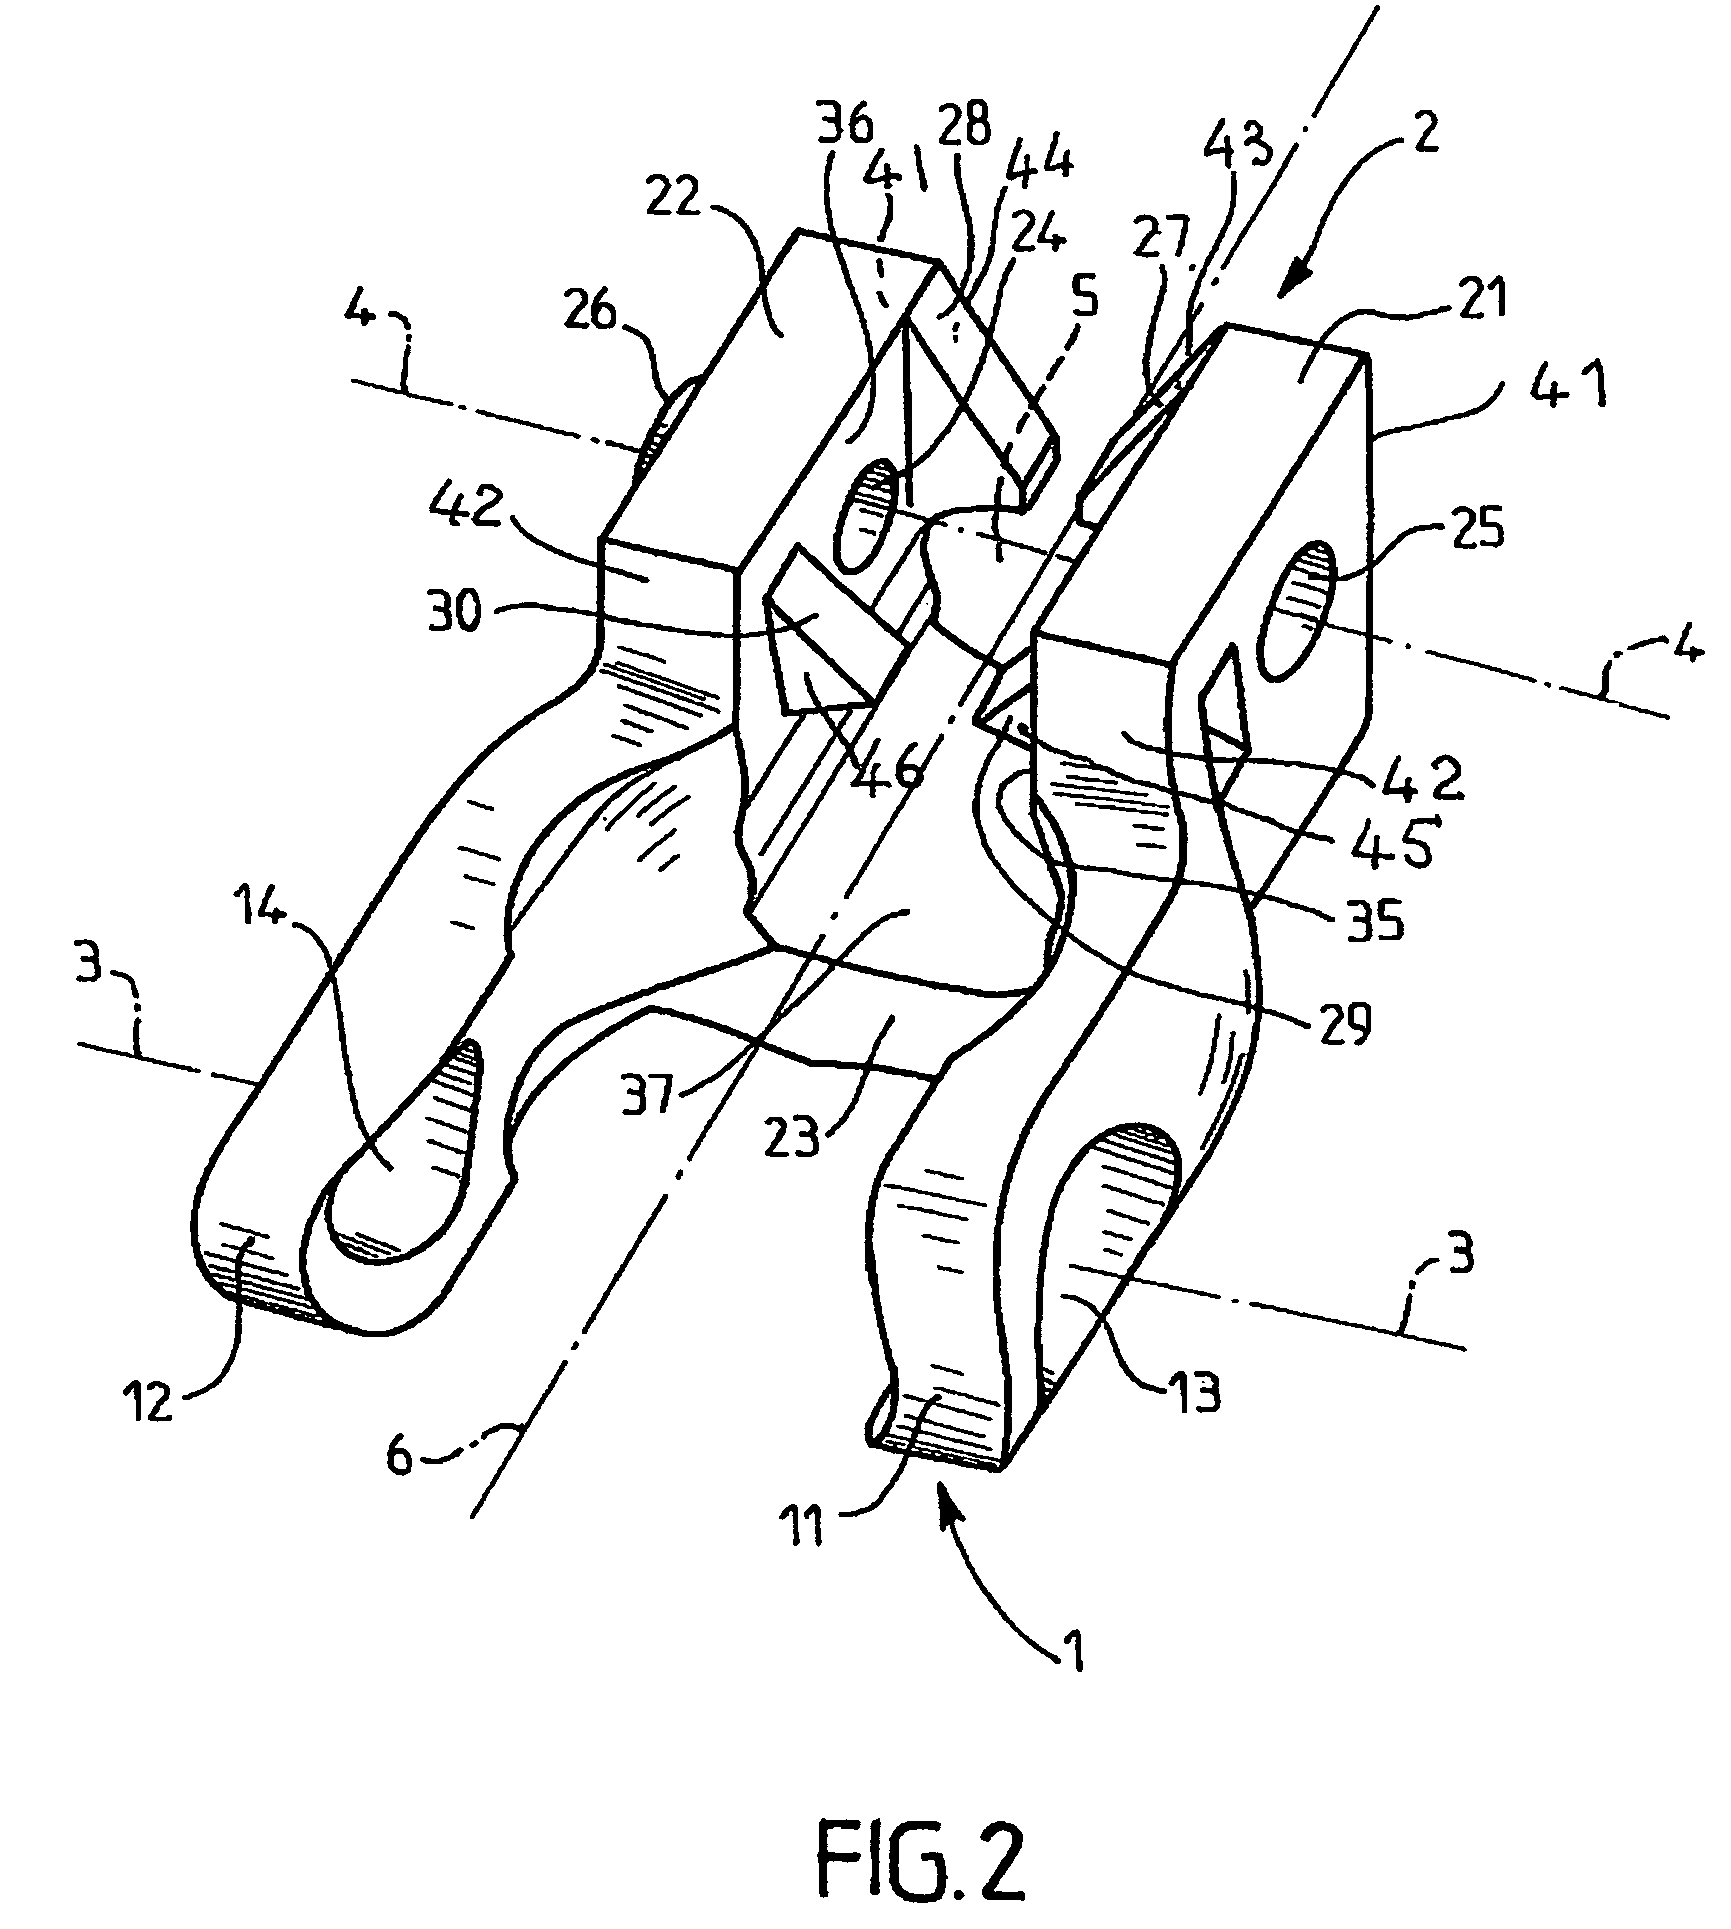 Stamped cardan joint yoke member for an automotive vehicle steering column